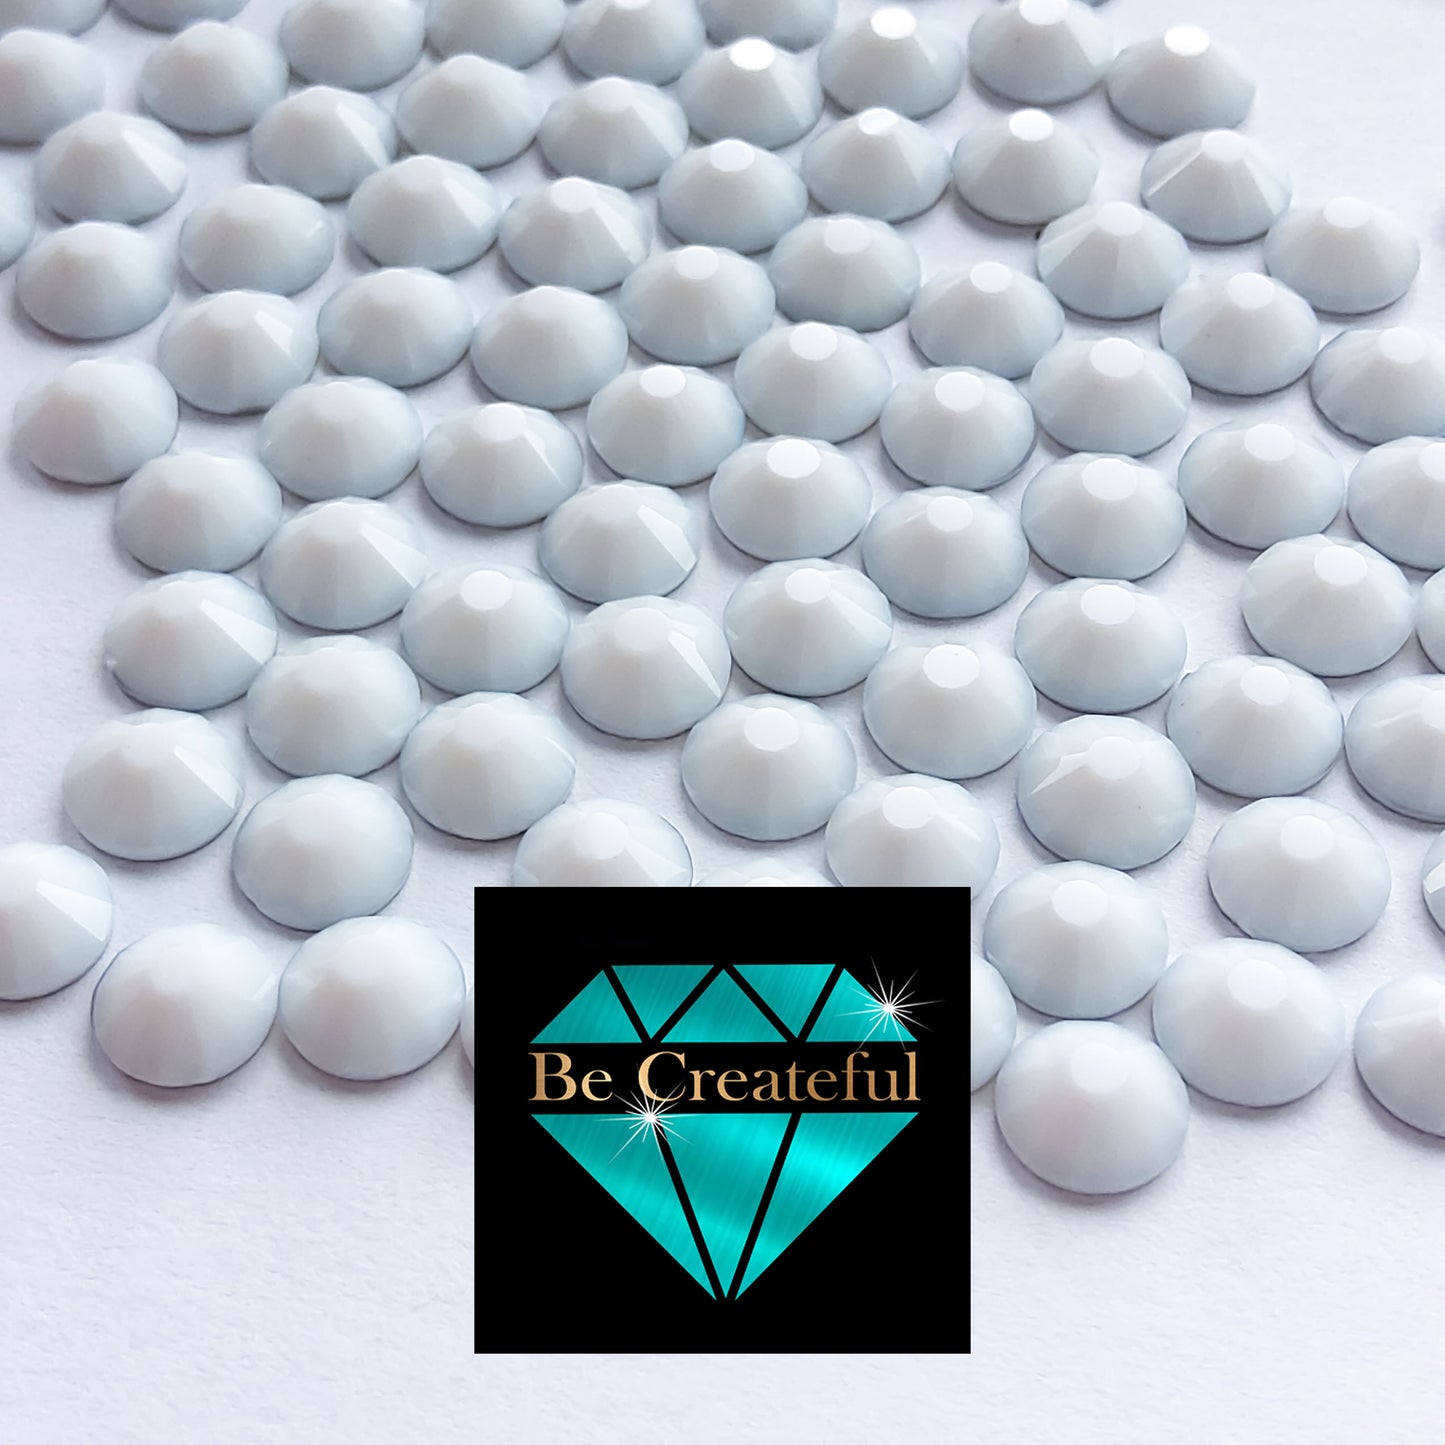 LUXE® White Hotfix Rhinestones are high-quality  glass Rhinestone that provides intense sparkle and refraction. 